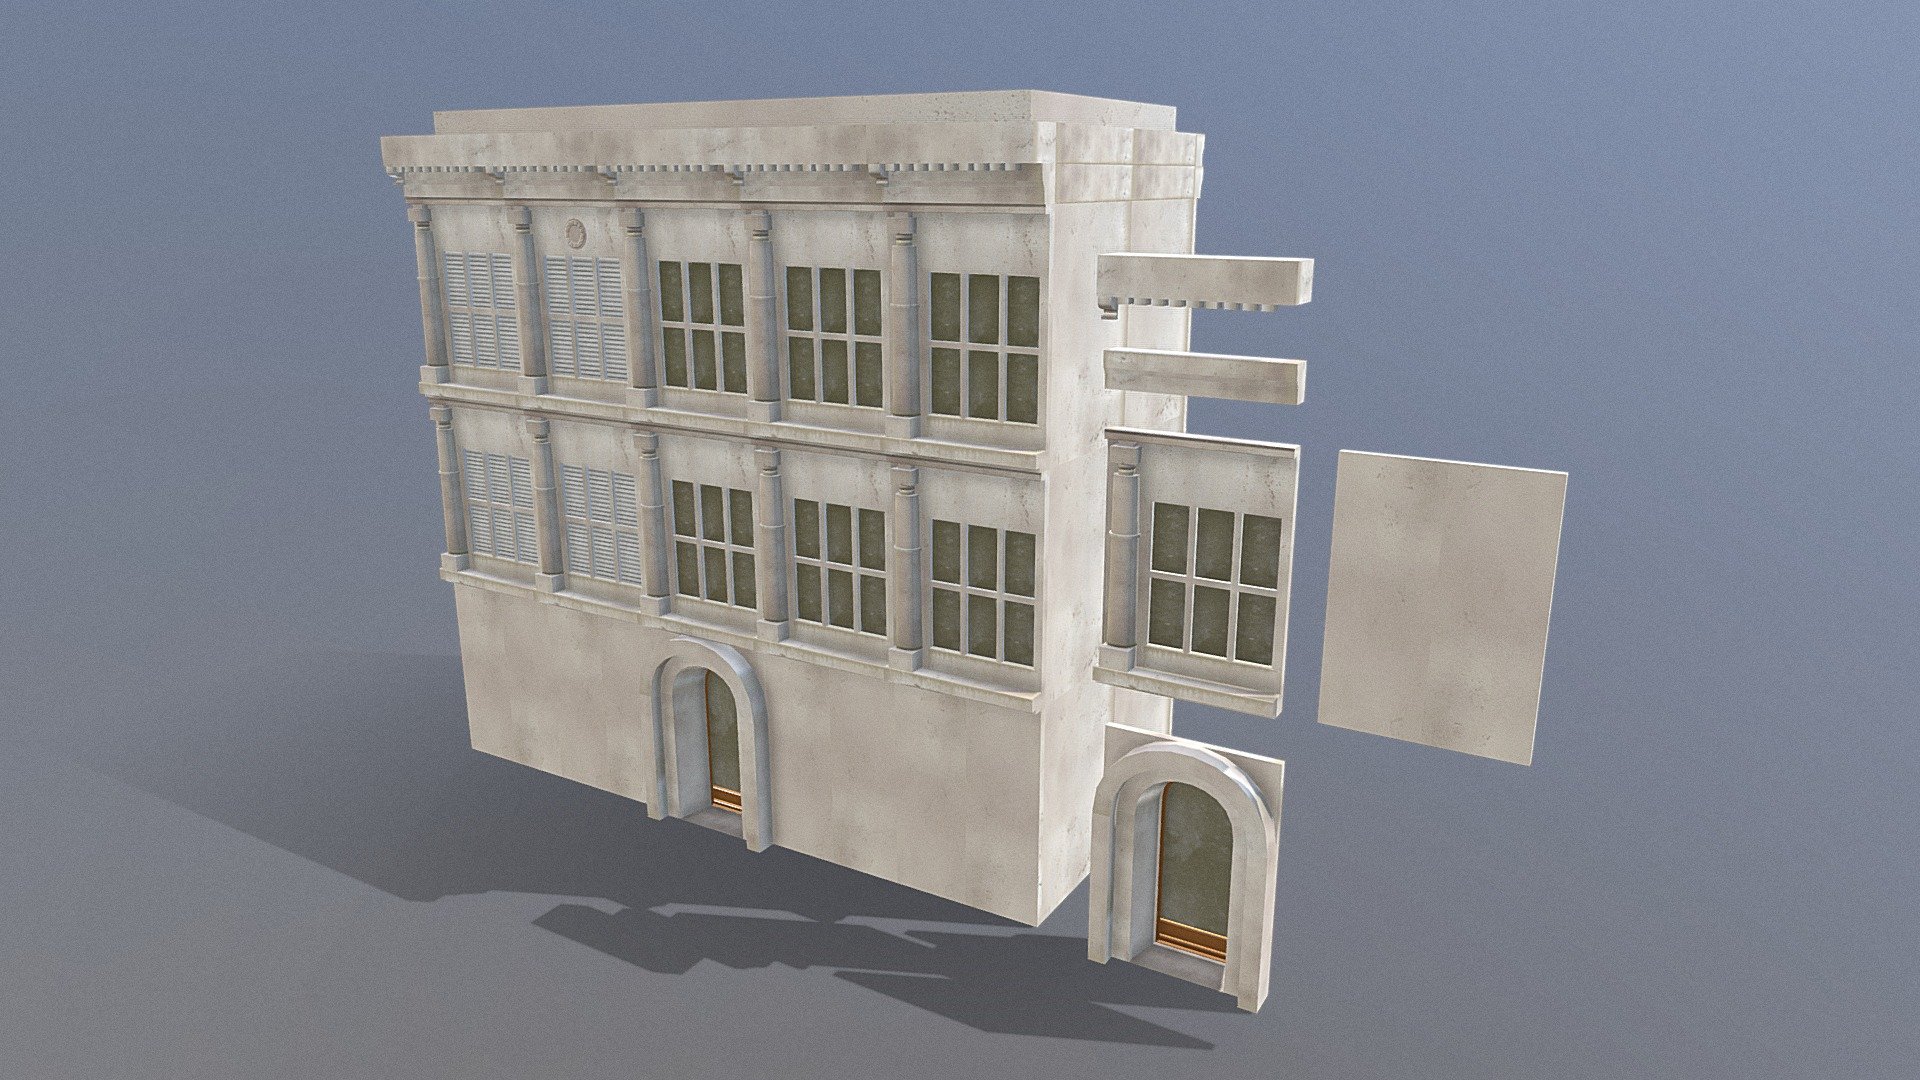 A simple set of 5 modular pieces to create your own building office /residential block. made from one trimsheet.




2x window facade (blinds and bare)

wall

entrance facade

2x roof decoration

The pivot point are on the bottom left for ease of snapping together. 

You can easily hide the tiling by adding decals.

PBR textures @4k - Modular building facade - Buy Royalty Free 3D model by Sousinho 3d model